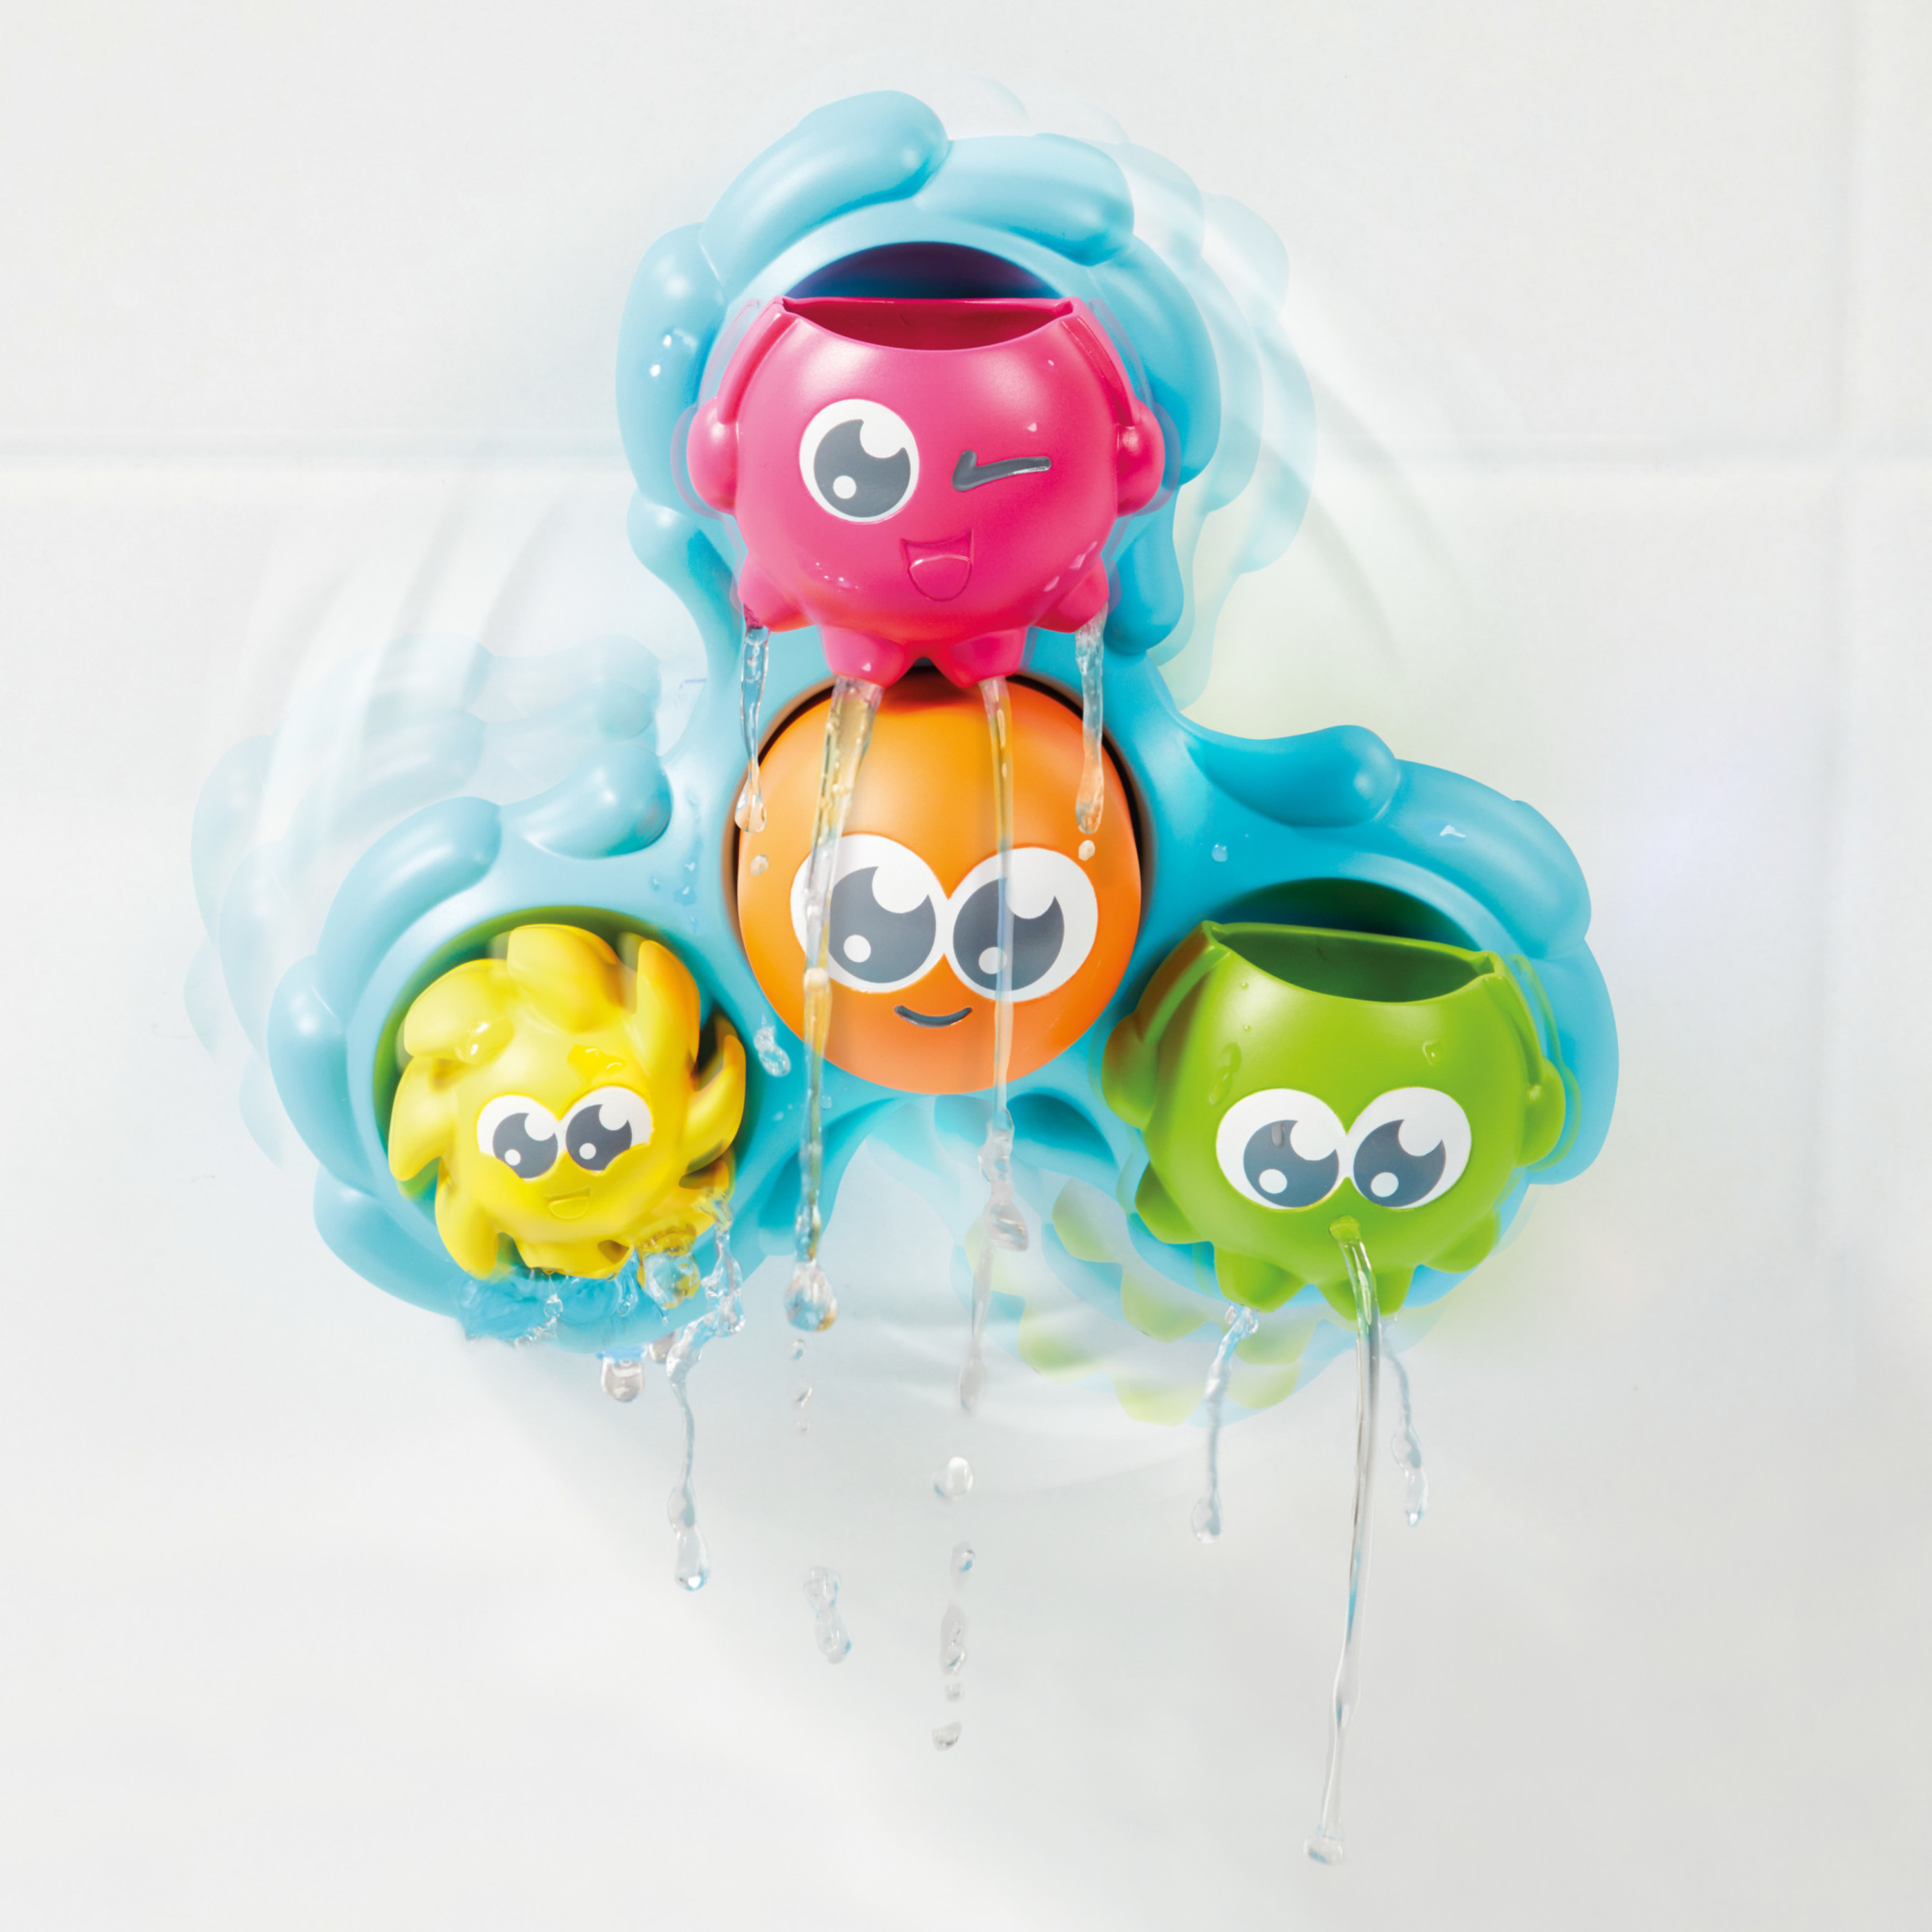 TOMY Toomies Spin And Splash Octopals Bath Toy, Colorful and Fun Toddler Bath Toys - image 2 of 6